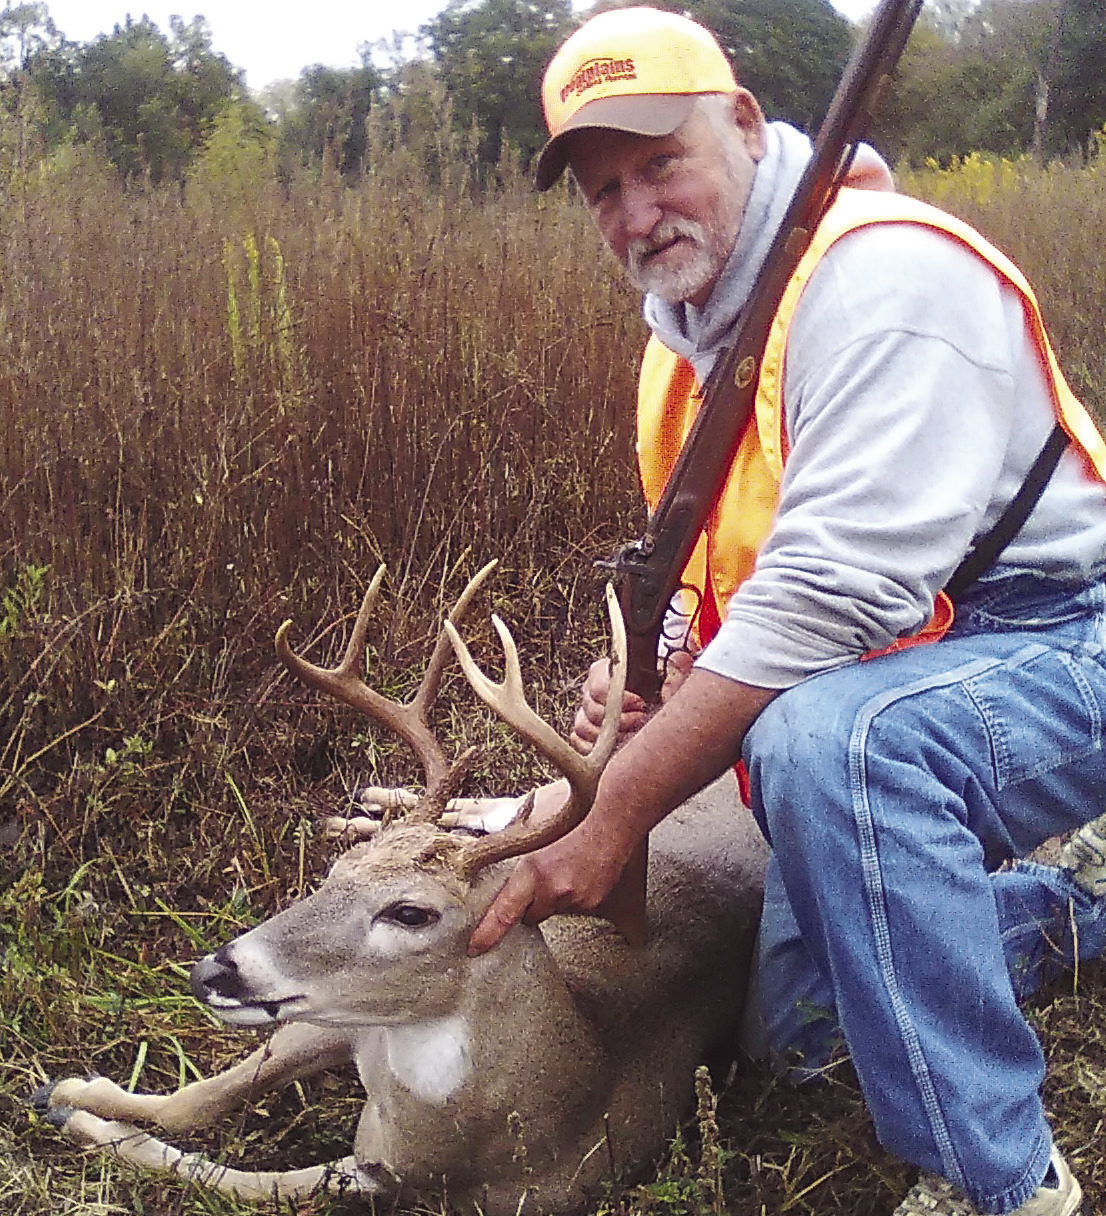 This 8-point buck was shot on October 30 during muzzle loading season by James A. Barber of Muldrow. SUBMITTED PHOTO